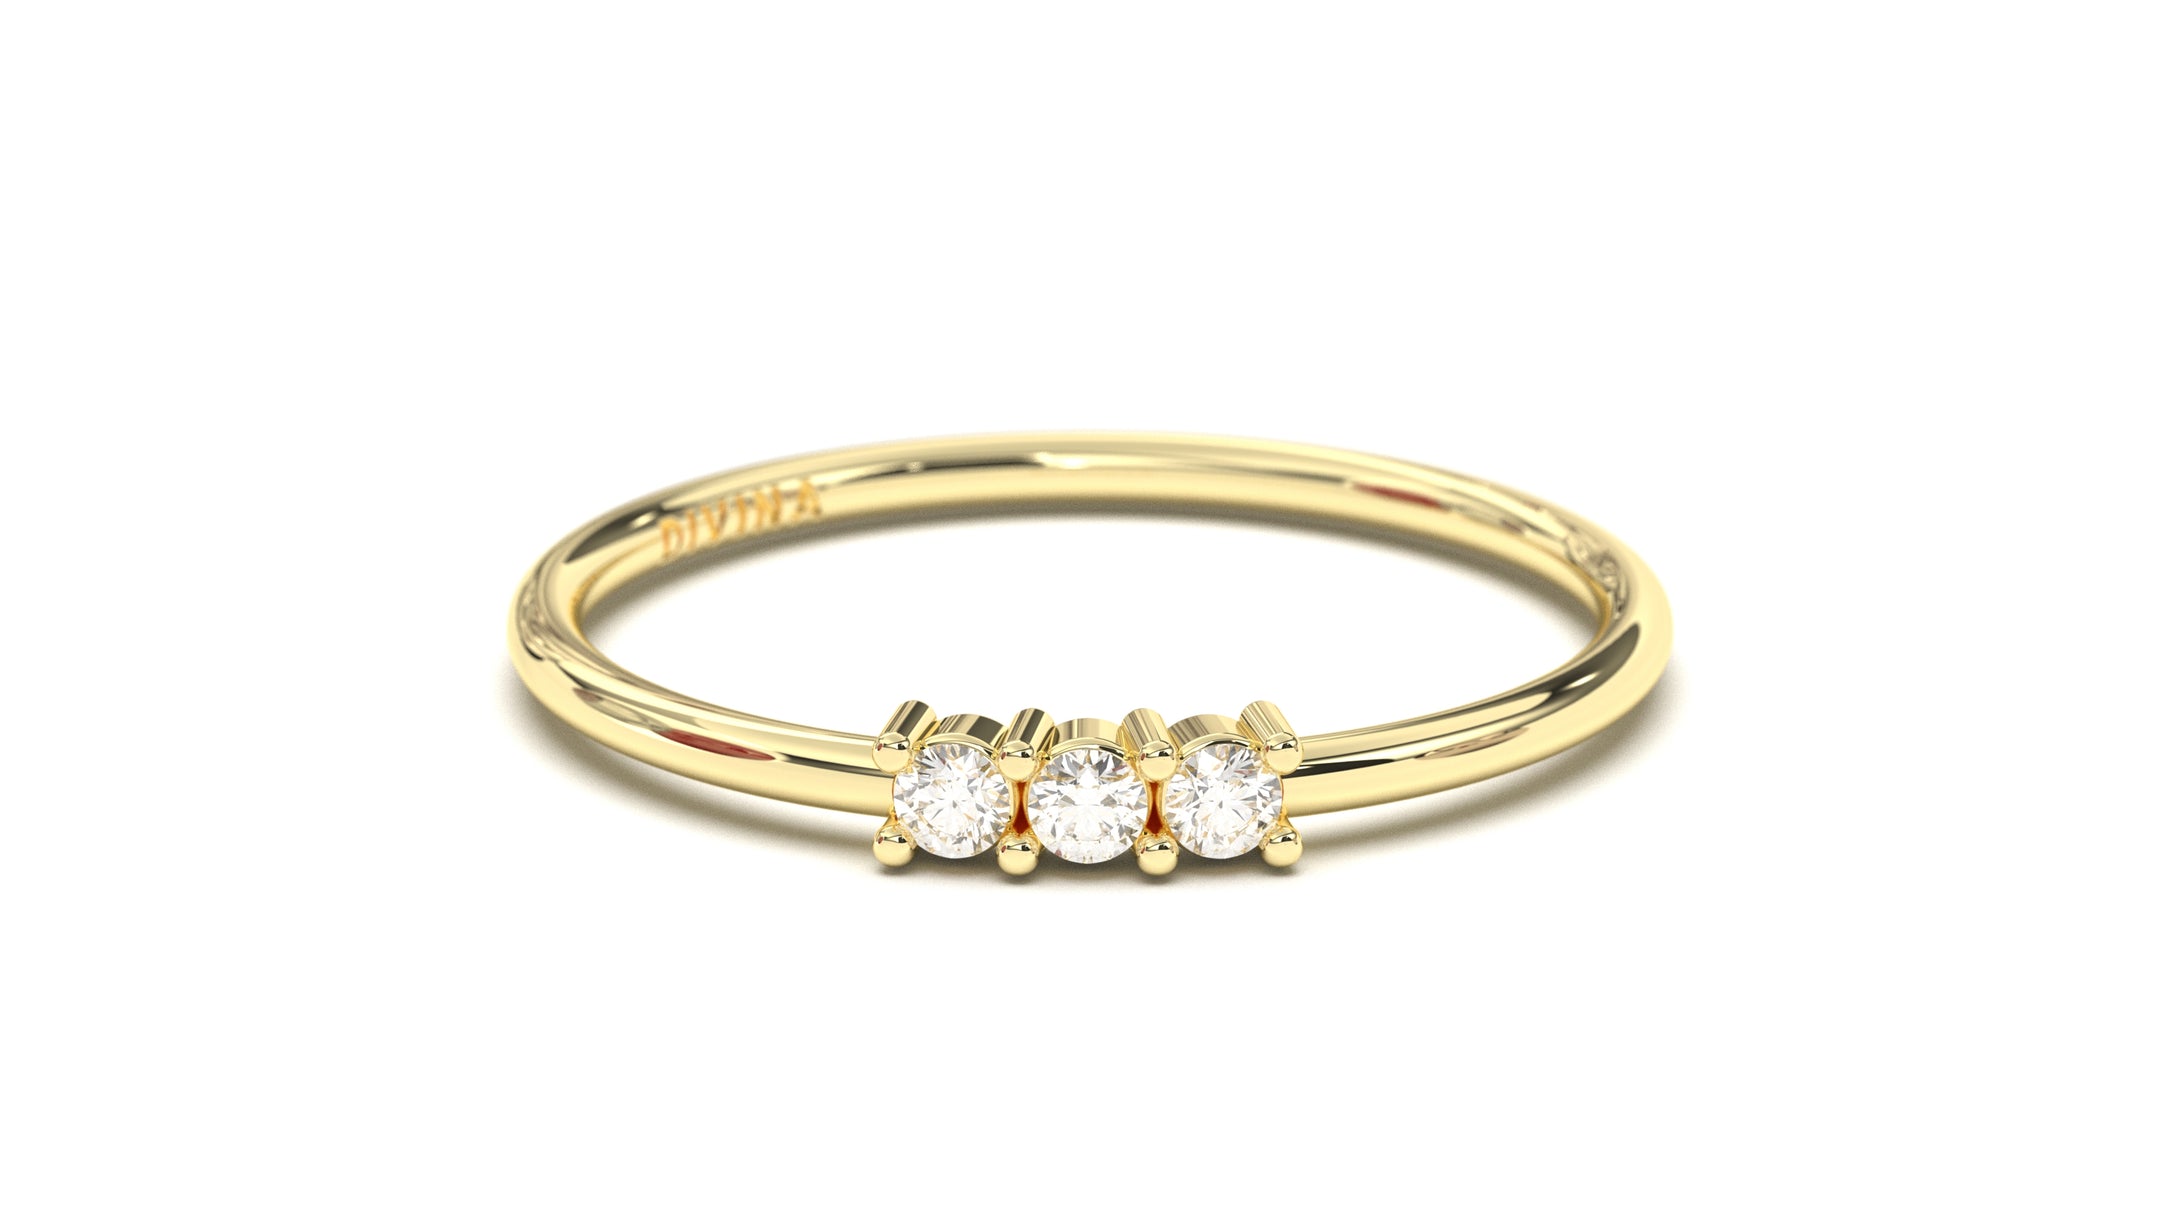 Stackable Gold Ring with Three Diamond Design | Mix & Match Solo XV